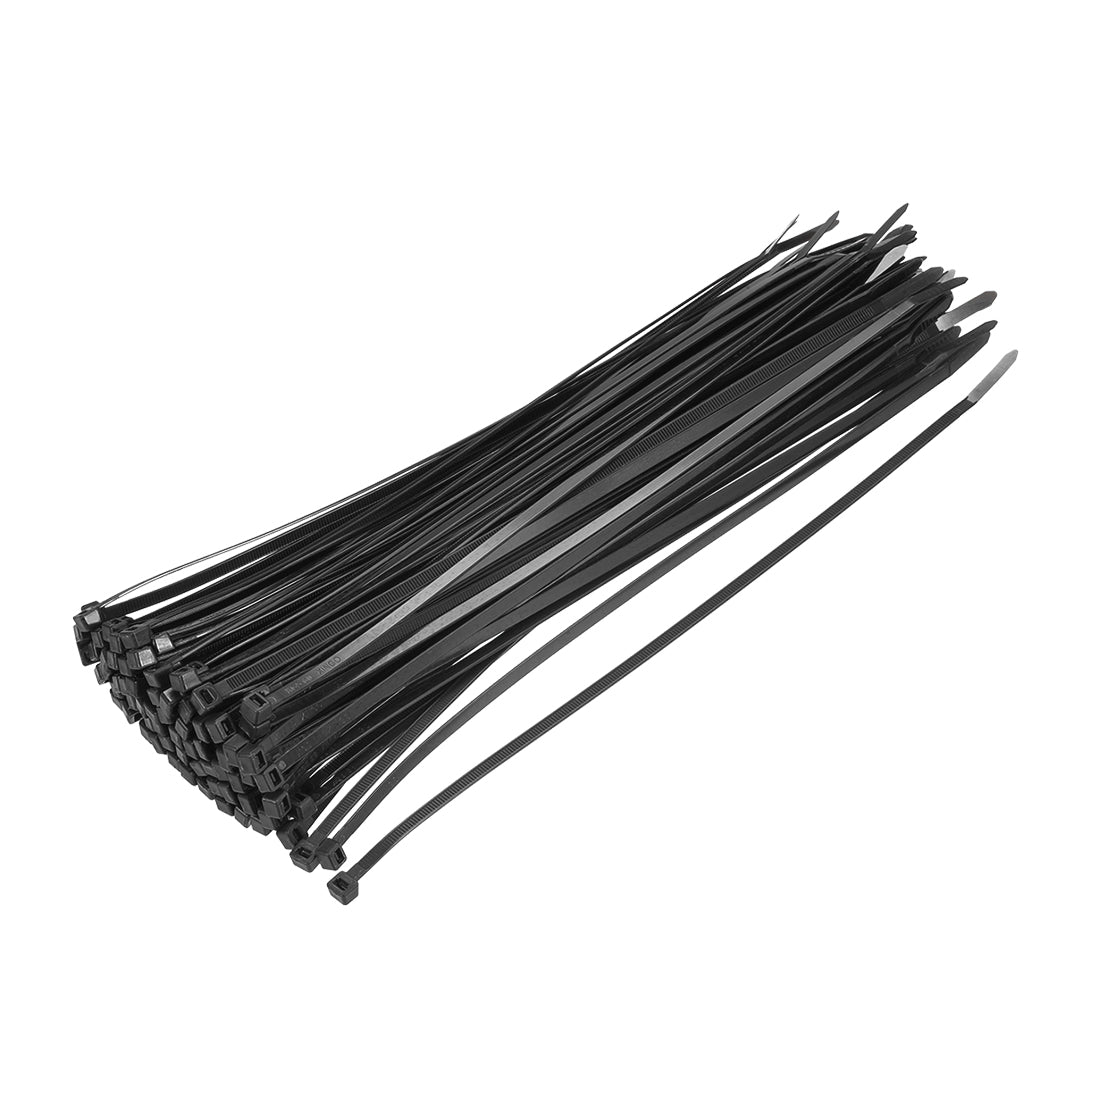 uxcell Uxcell Cable Zip Ties 300mmx4.8mm Self-Locking Nylon Tie Wraps Black 40pcs